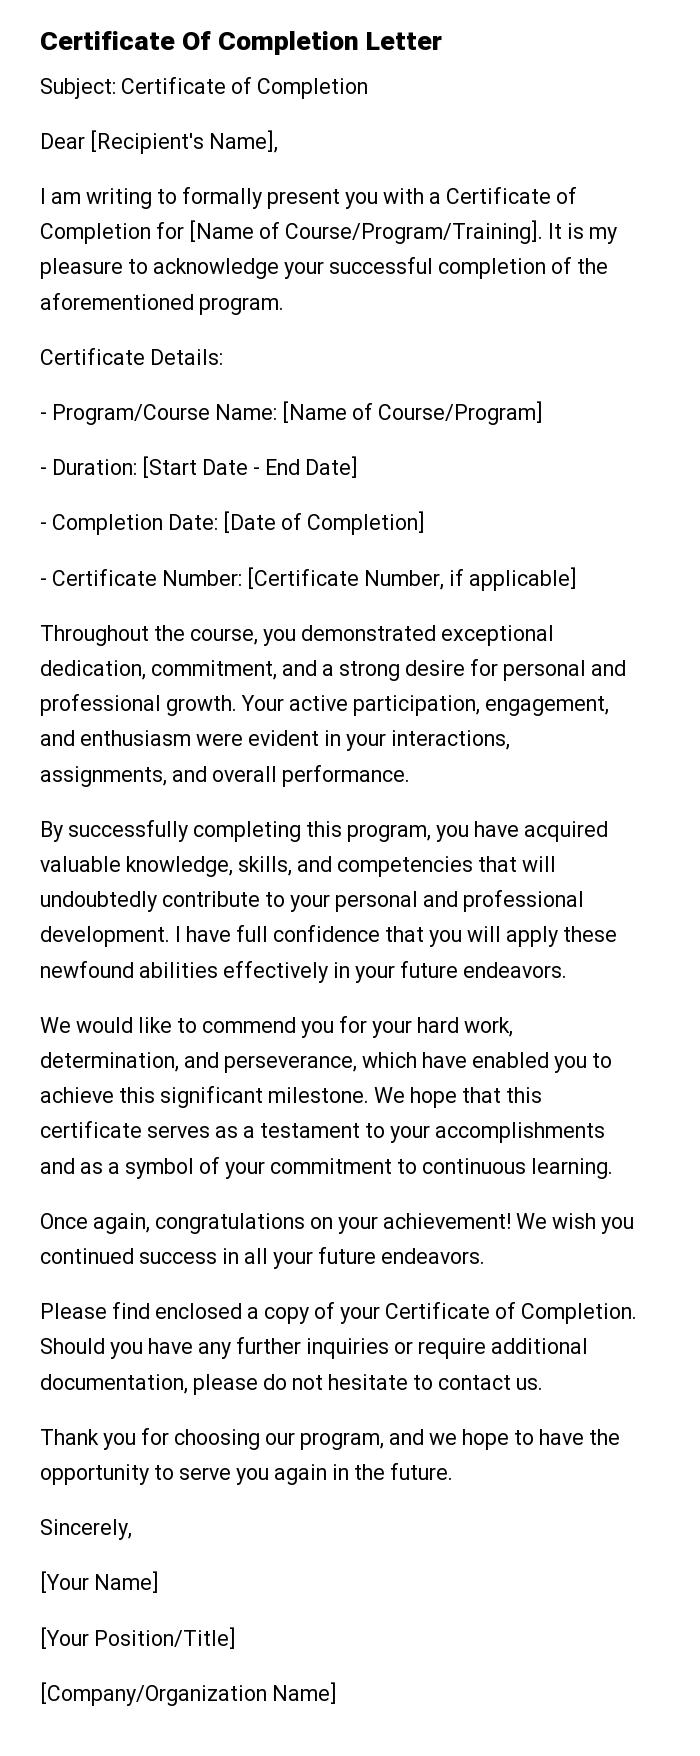 Certificate Of Completion Letter